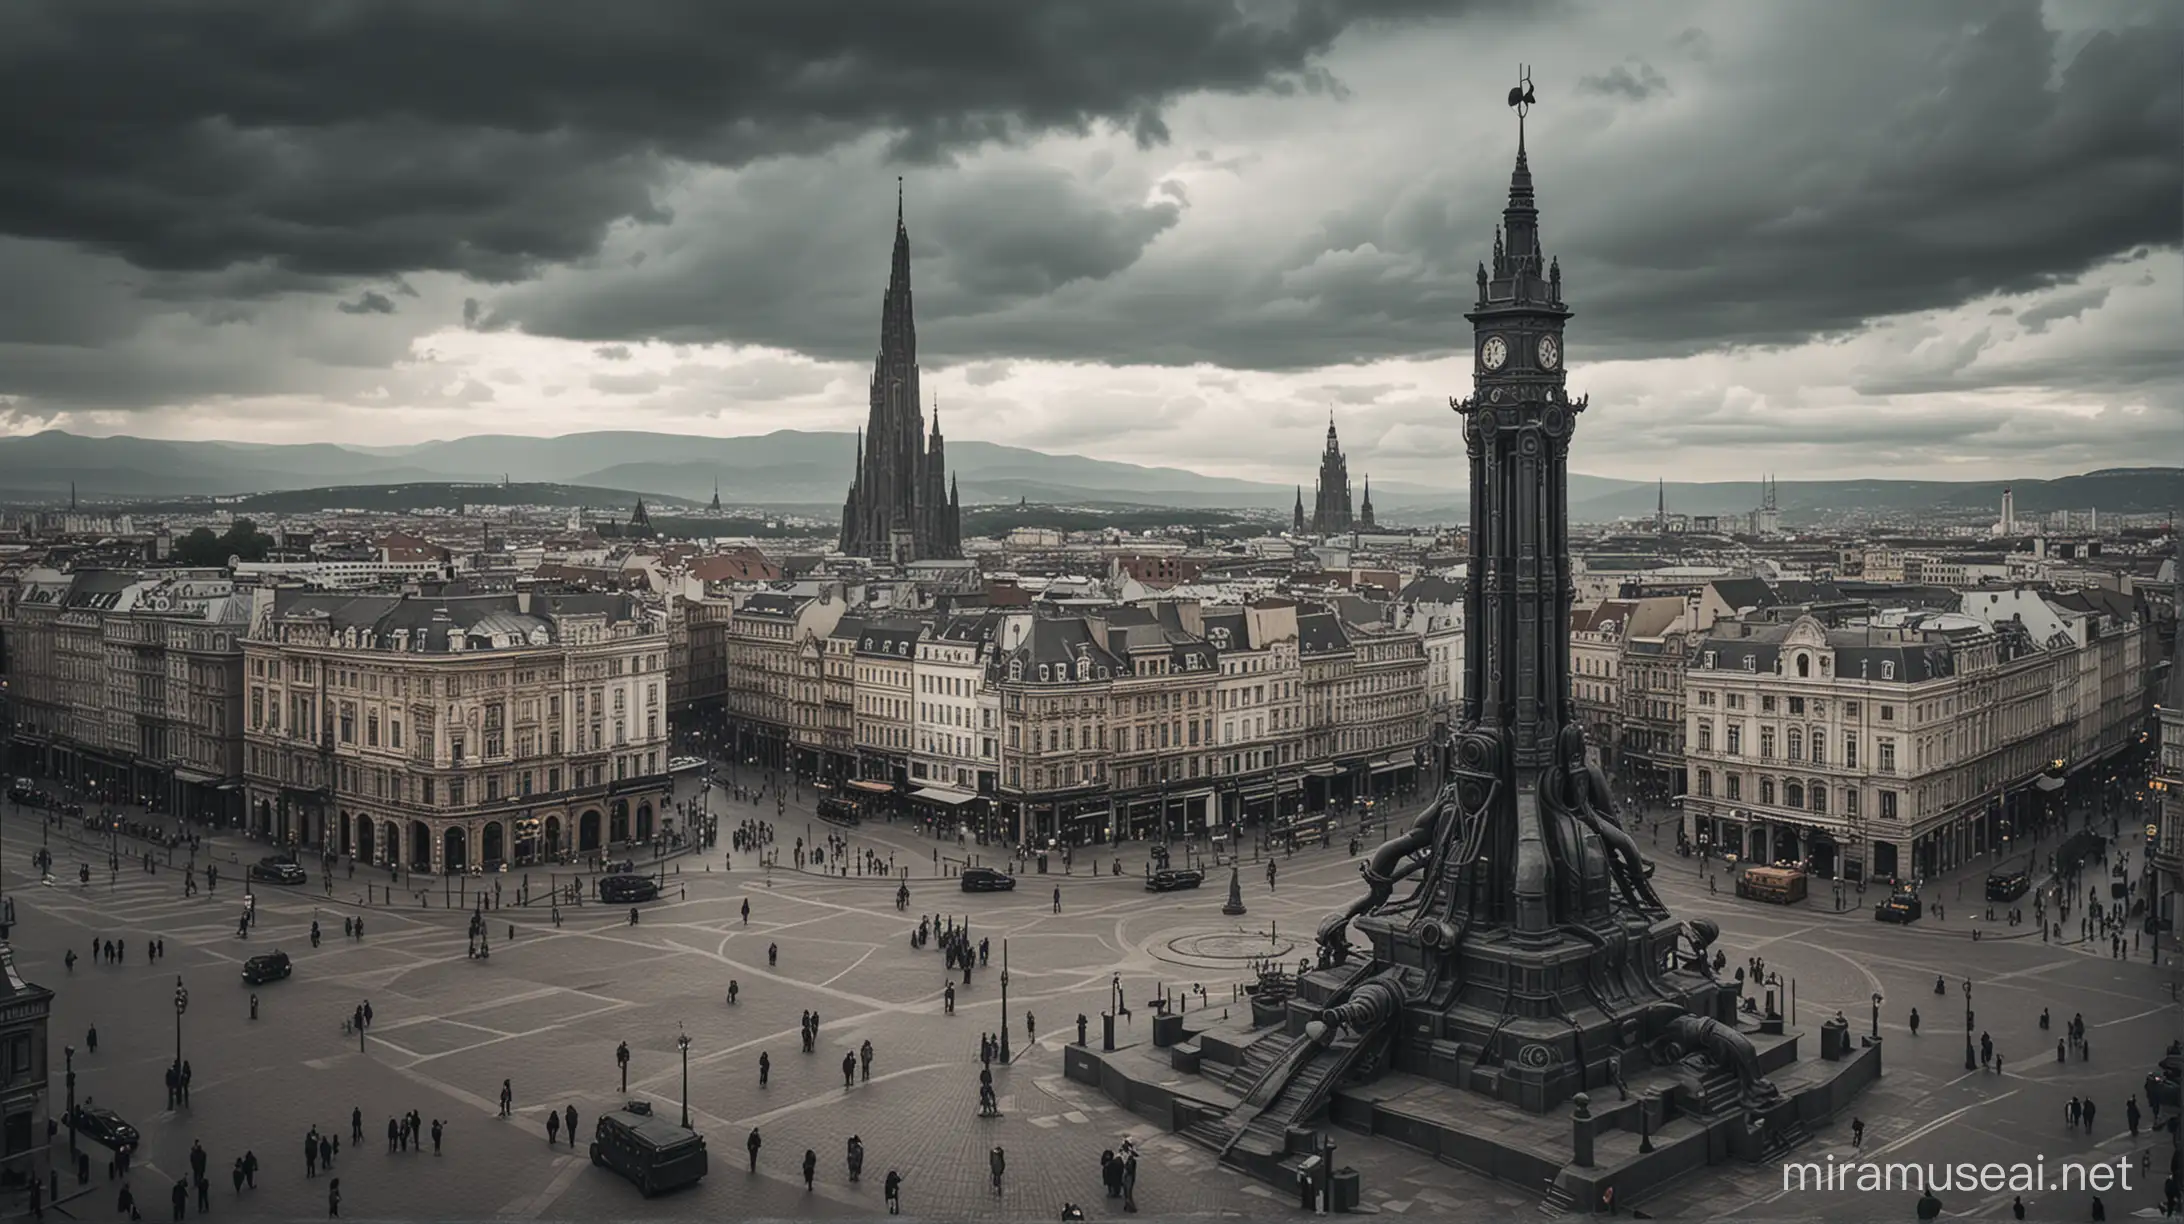 the monument of an alien on the main square of a steampunk city. distant view from a high building. dark. cloudy.